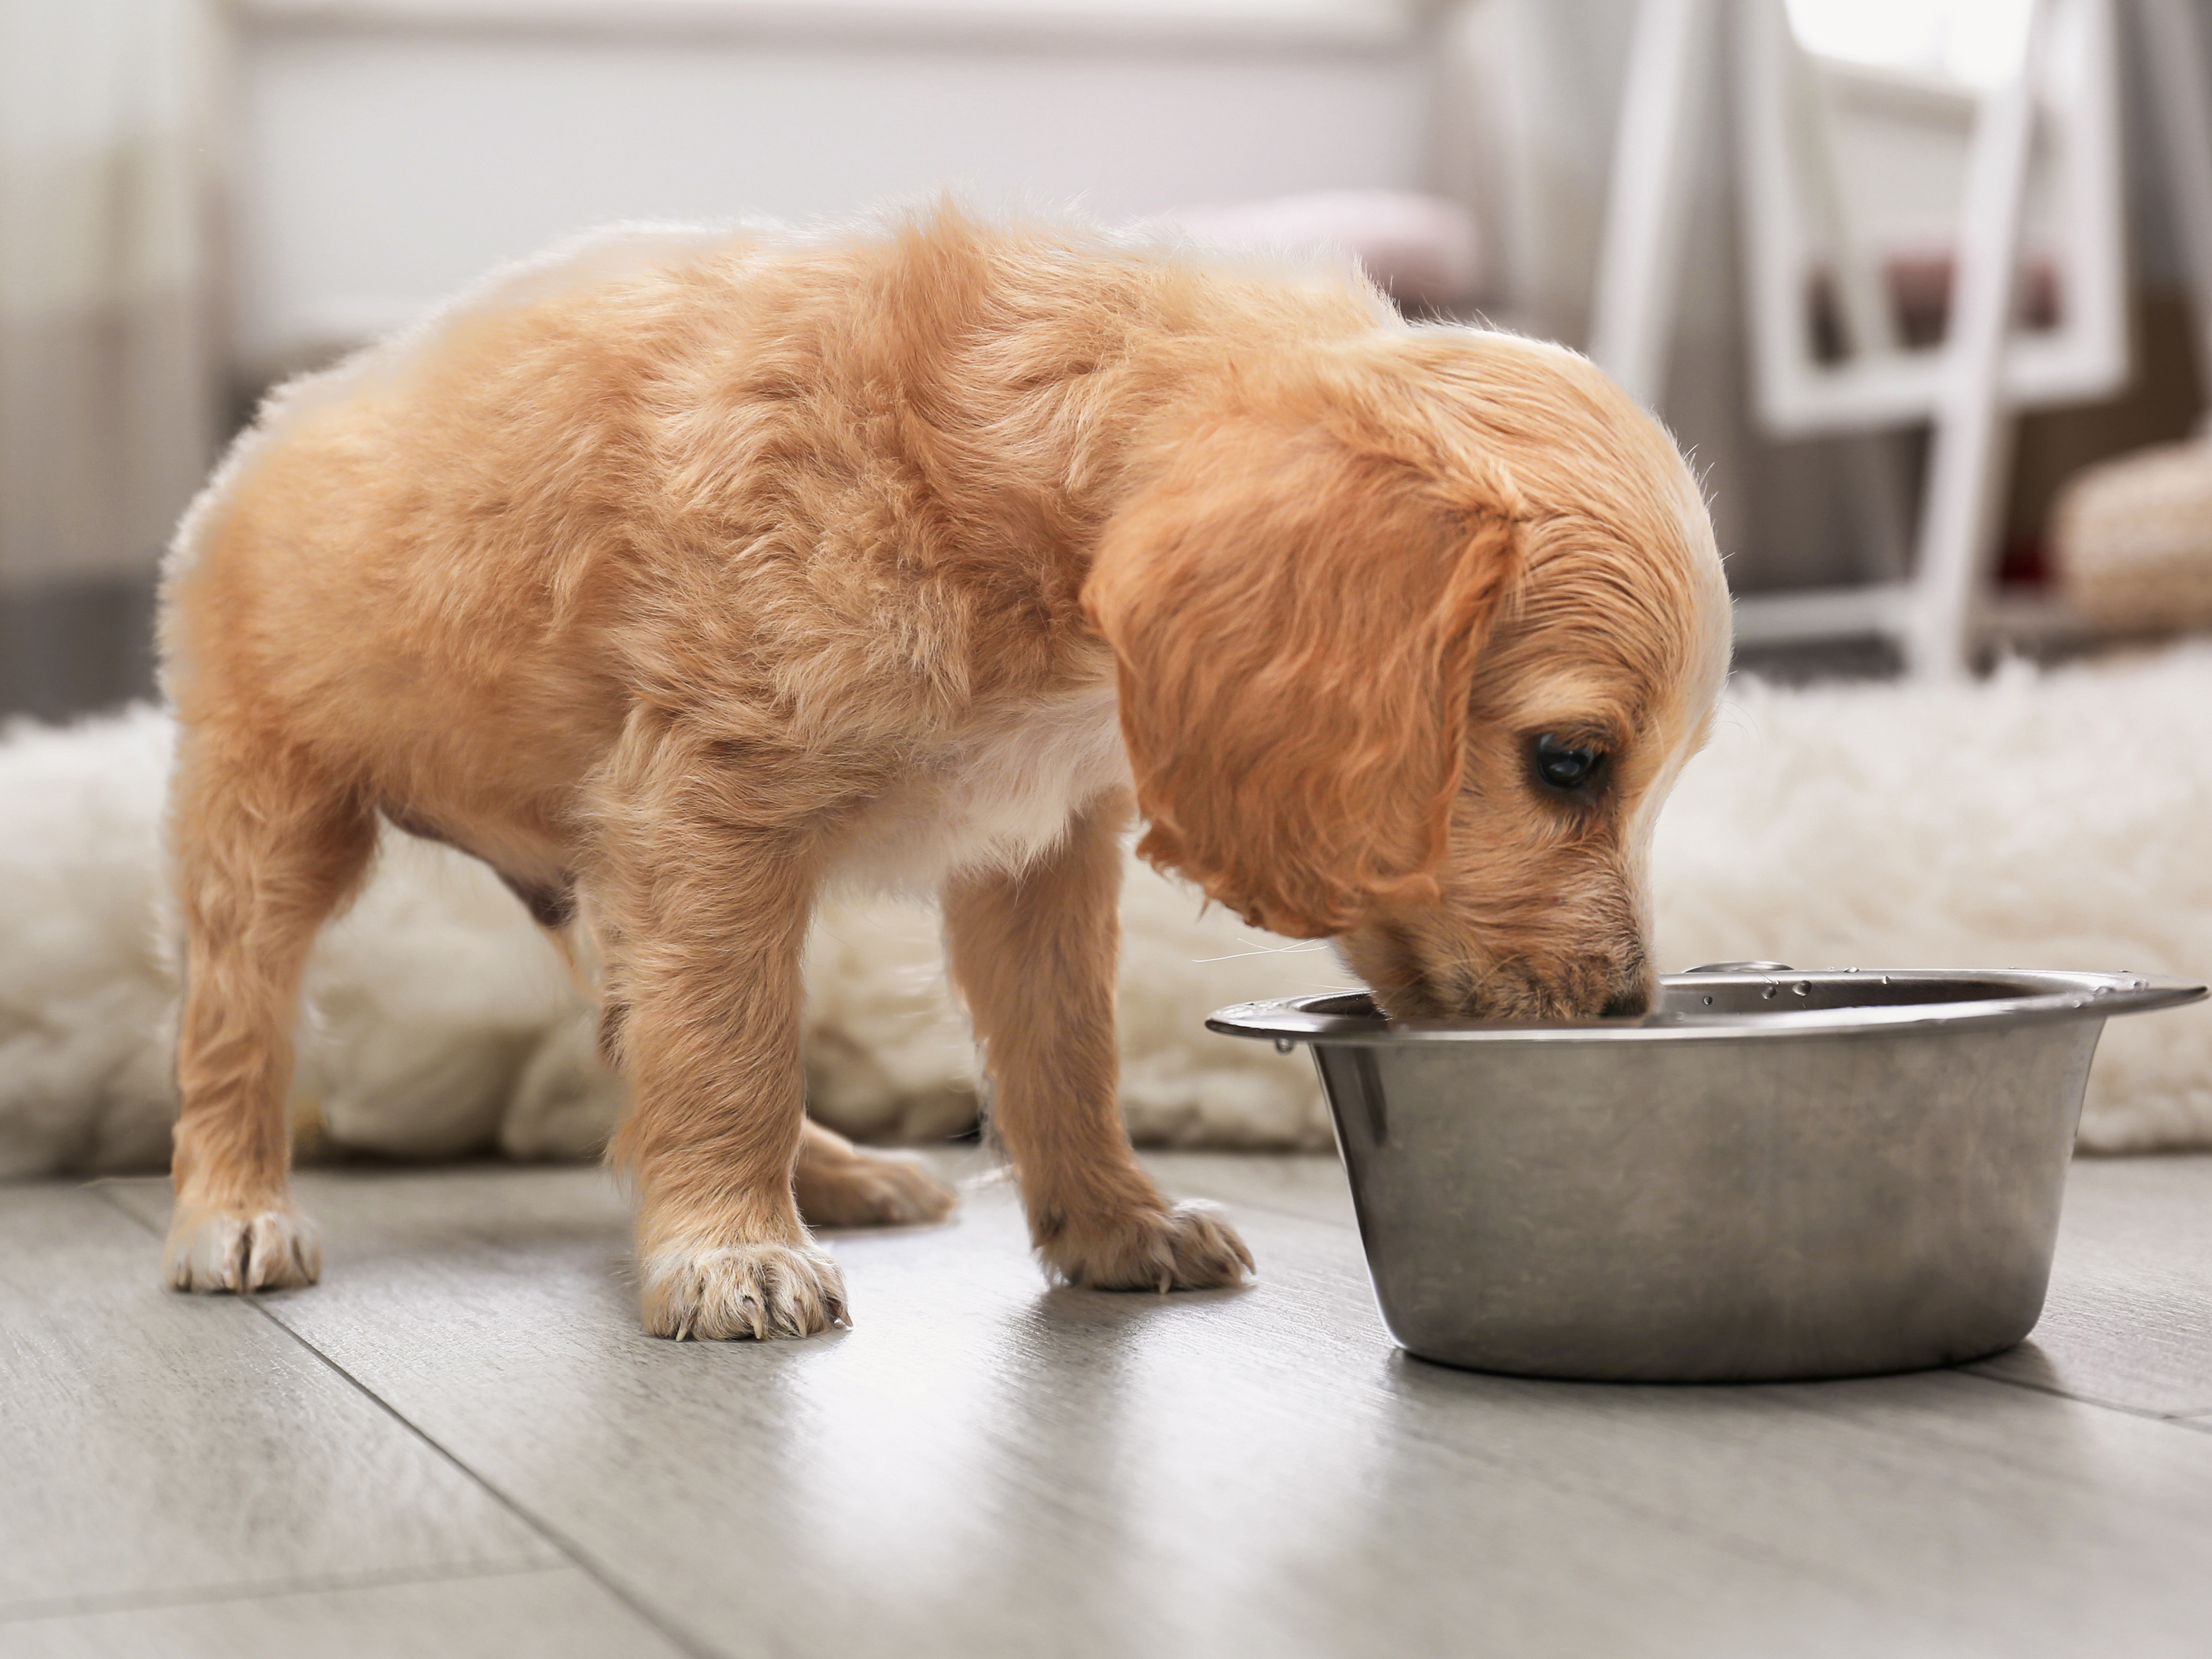 English Cocker Spaniel puppy eating from a stainless steel bowl